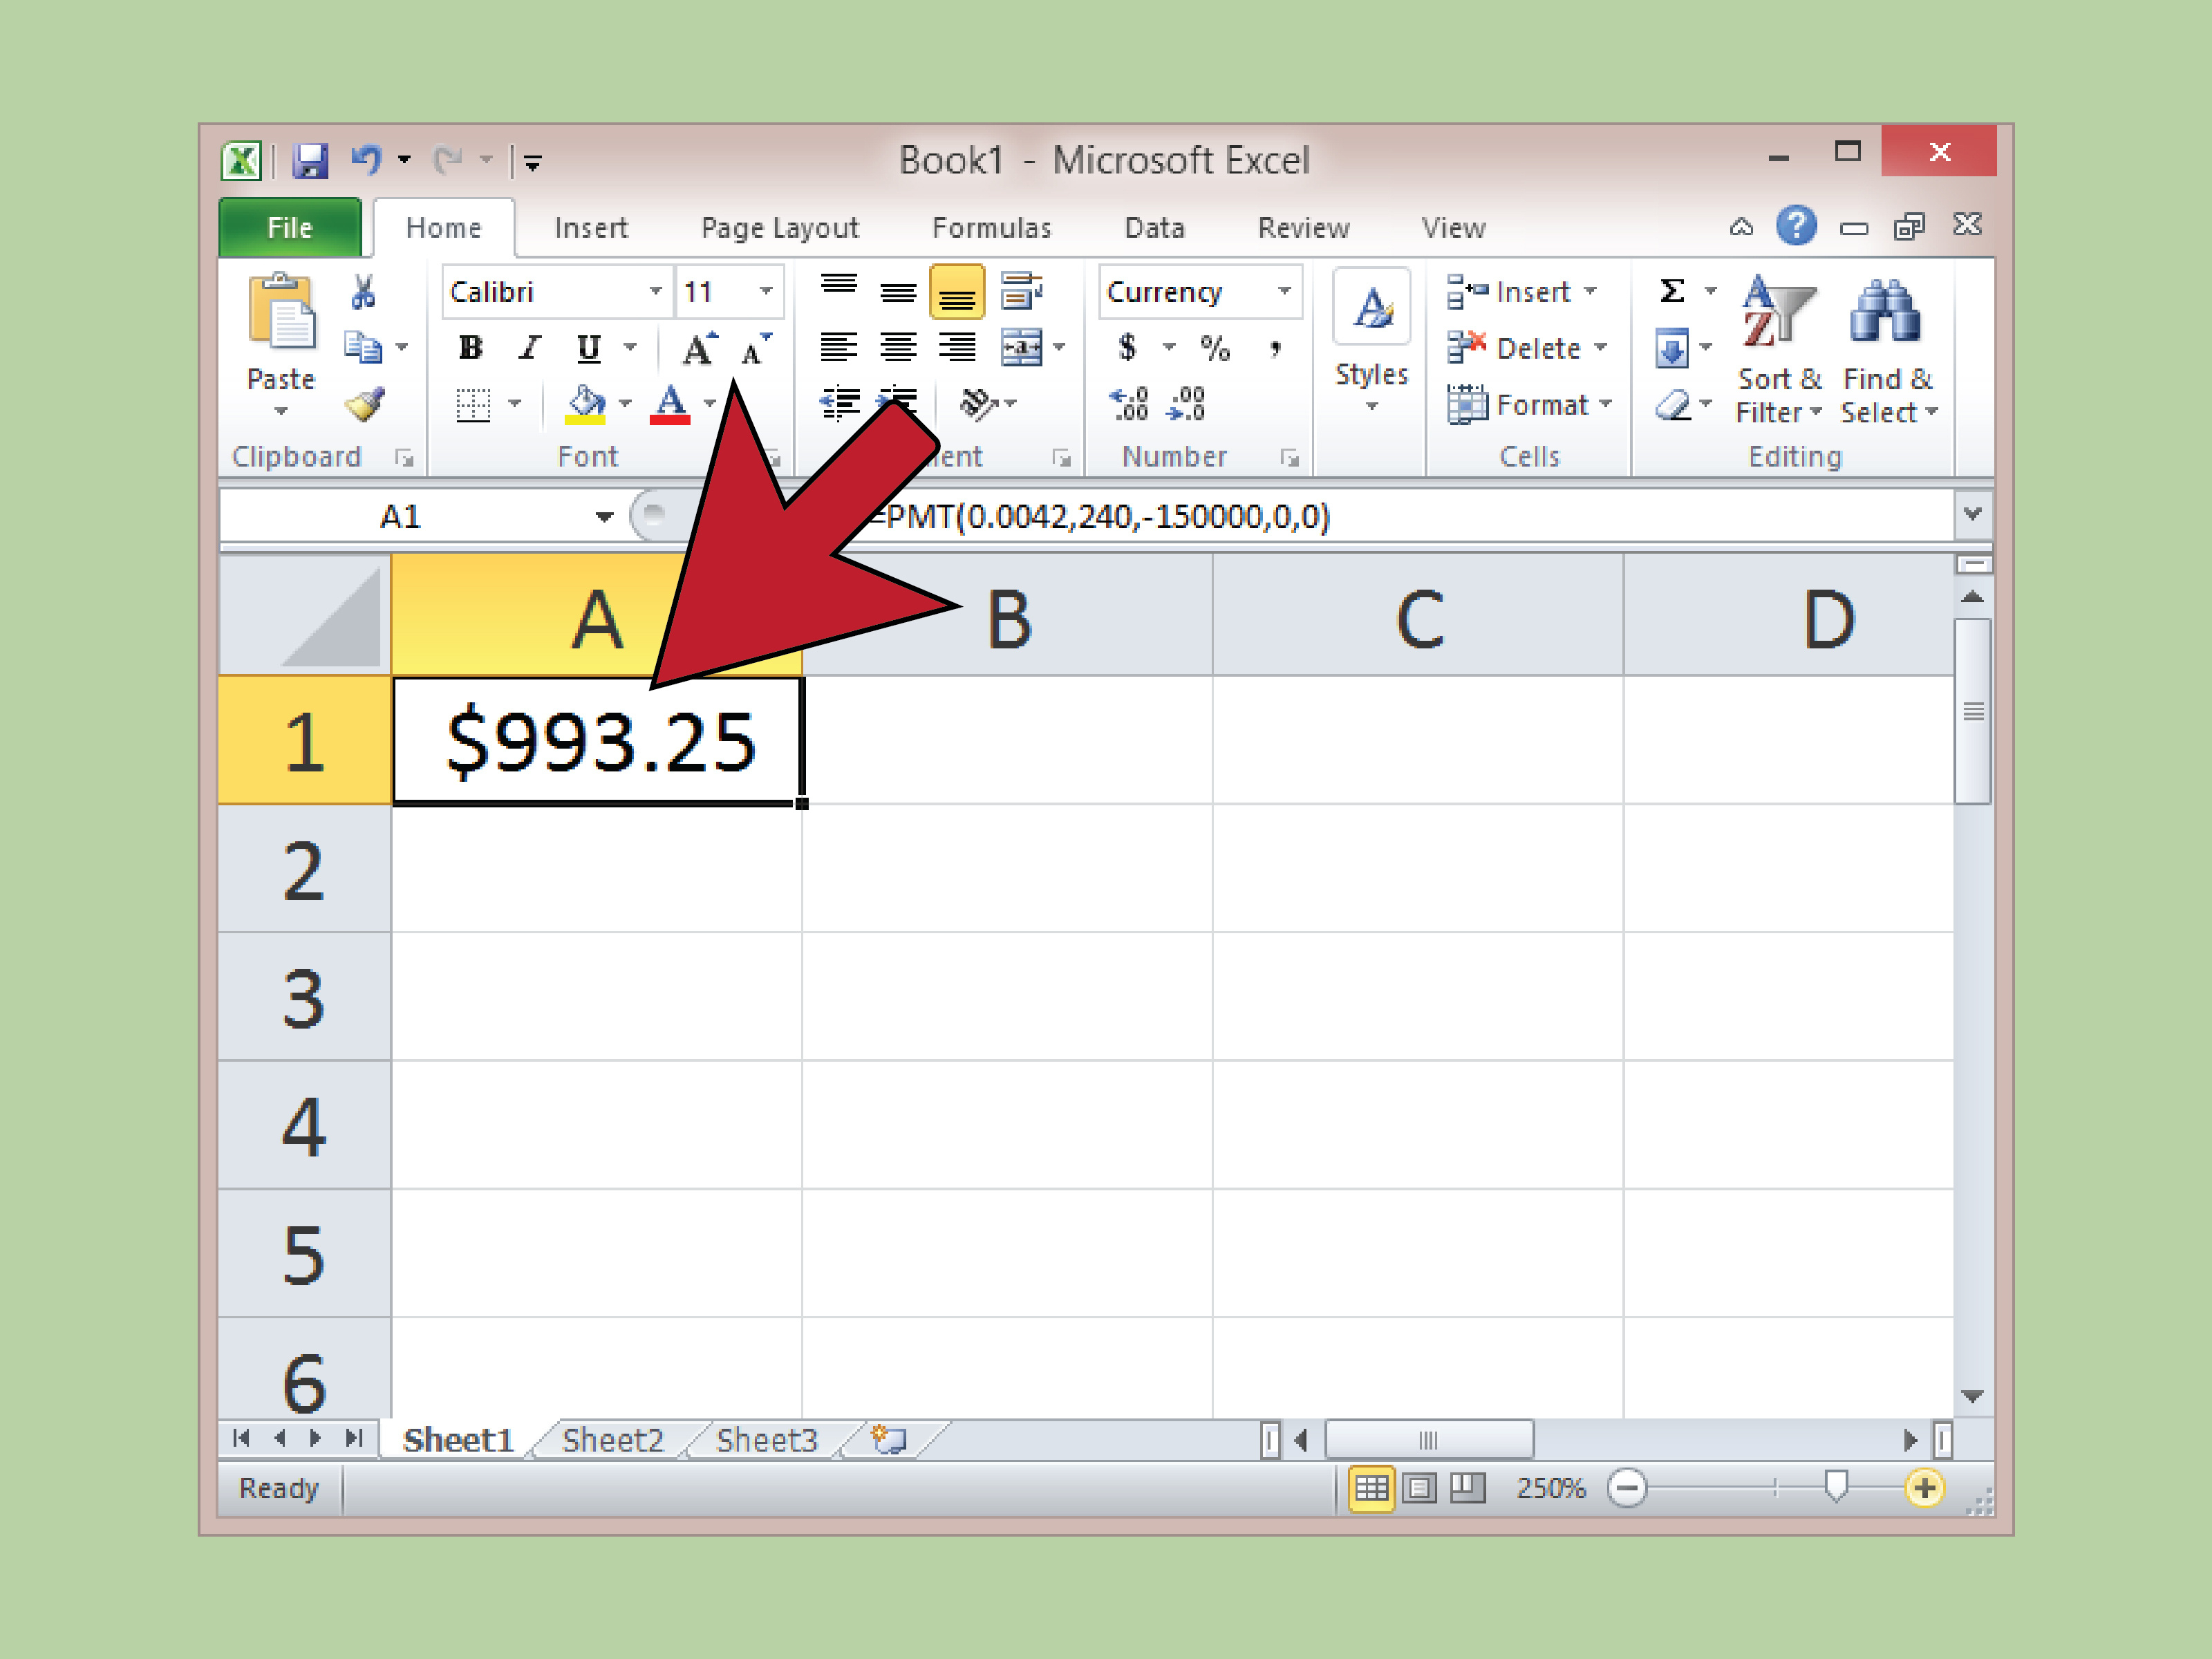 Microsoft Excel Spreadsheet Instructions In Microsoft Excel Spreadsheet Instructions ...3200 x 2400